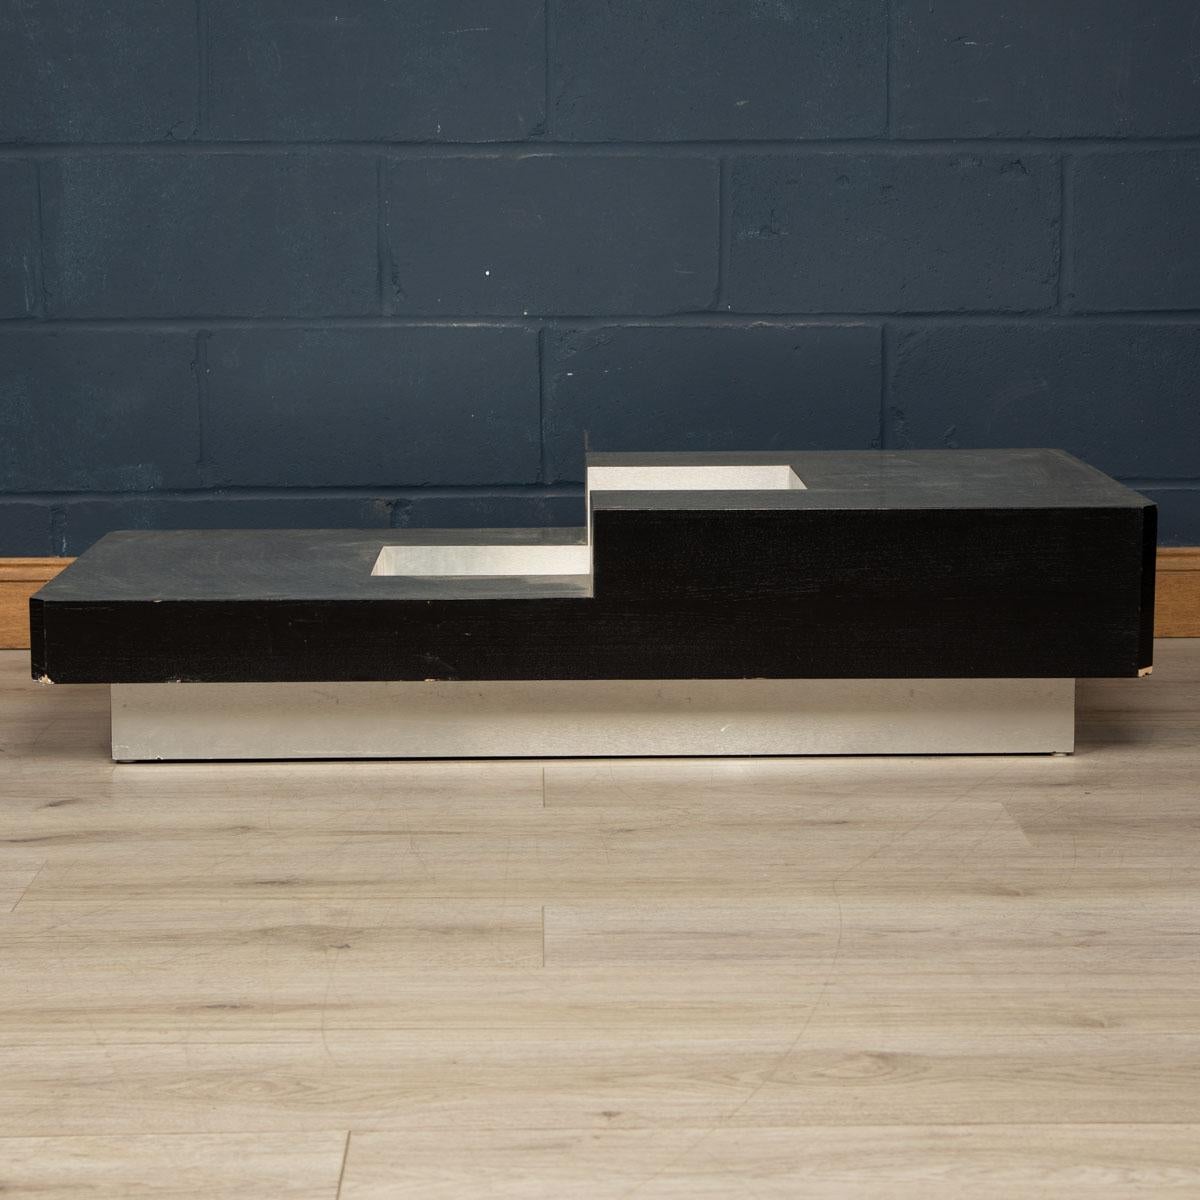 Aluminum 20th Century Coffee Table With A Dry Bar Compartment By Willy Rizzo, Italy